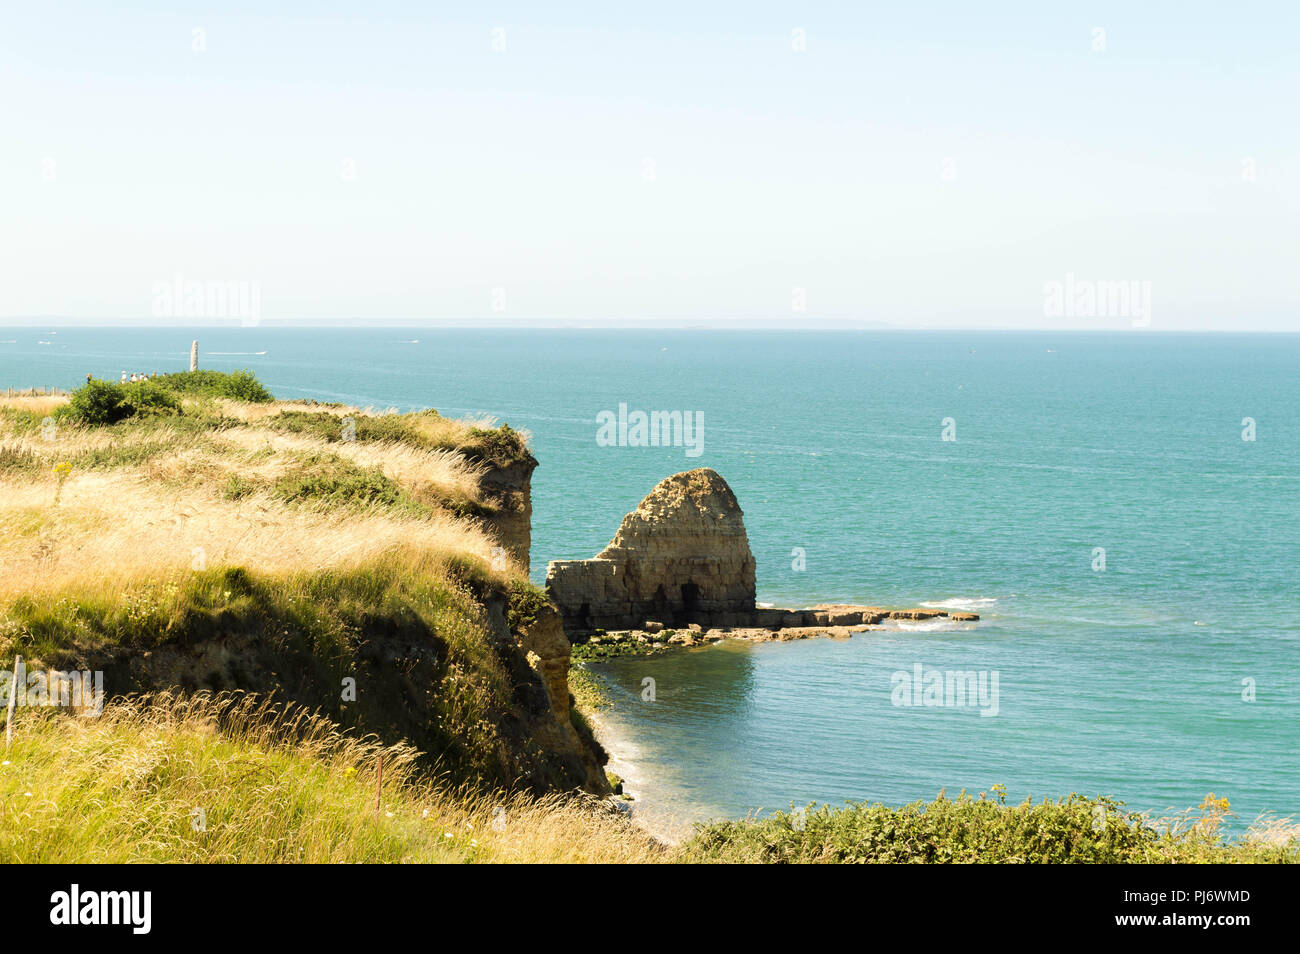 Cliff at seaside on a sunny day with burnt grass and rocks Stock Photo